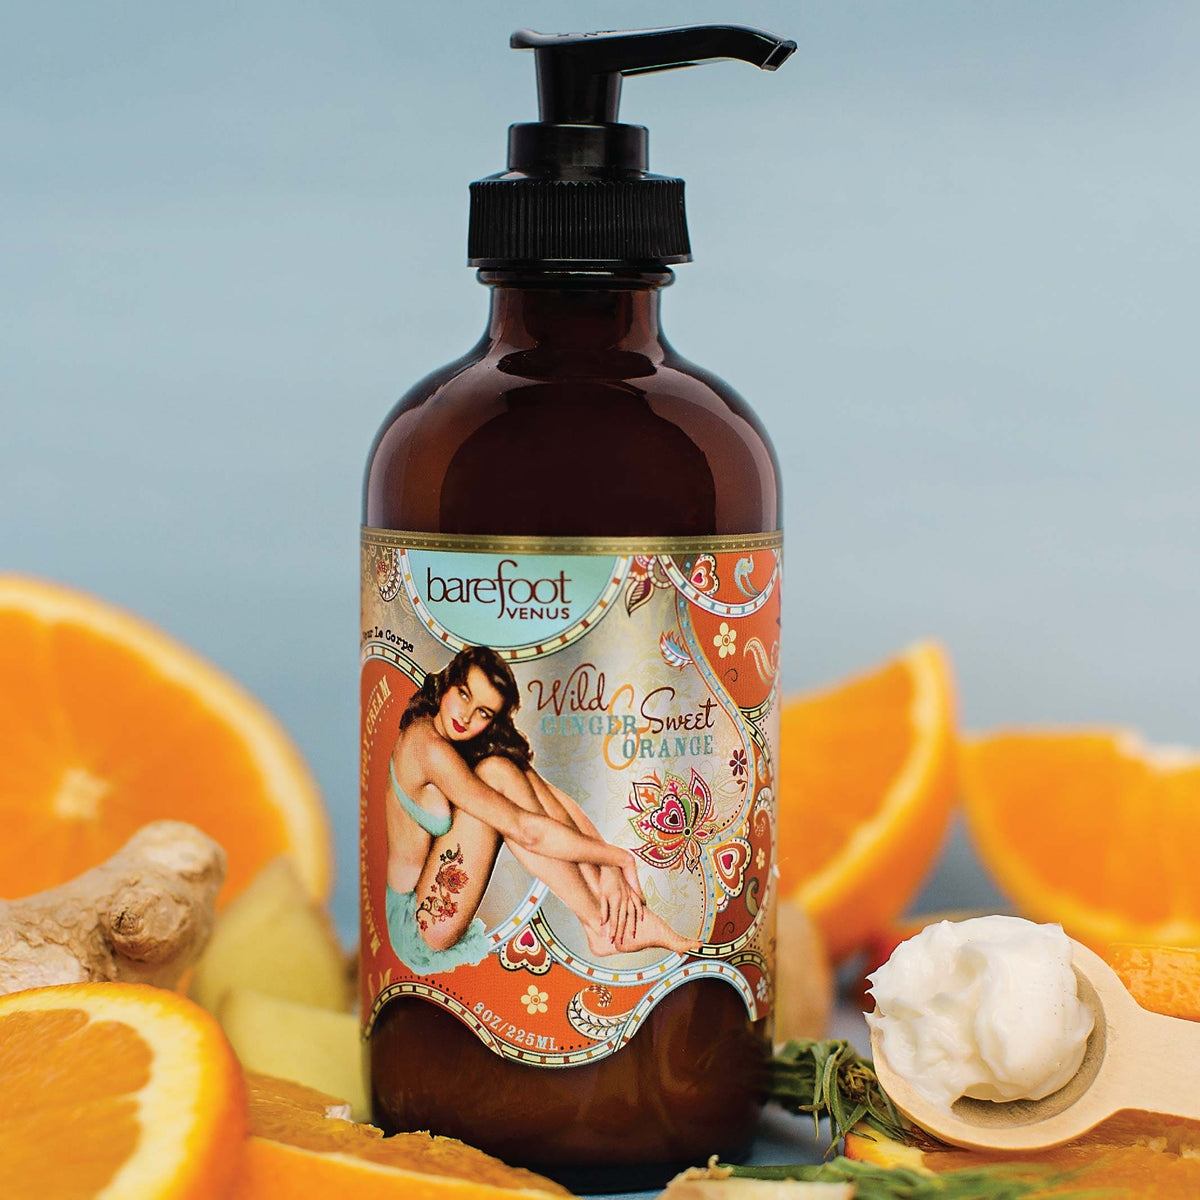 Wild Ginger &amp; Sweet Orange Body Cream HYDRATION BOOST FOR VISIBLY HEALTHY SKIN. Barefoot Venus